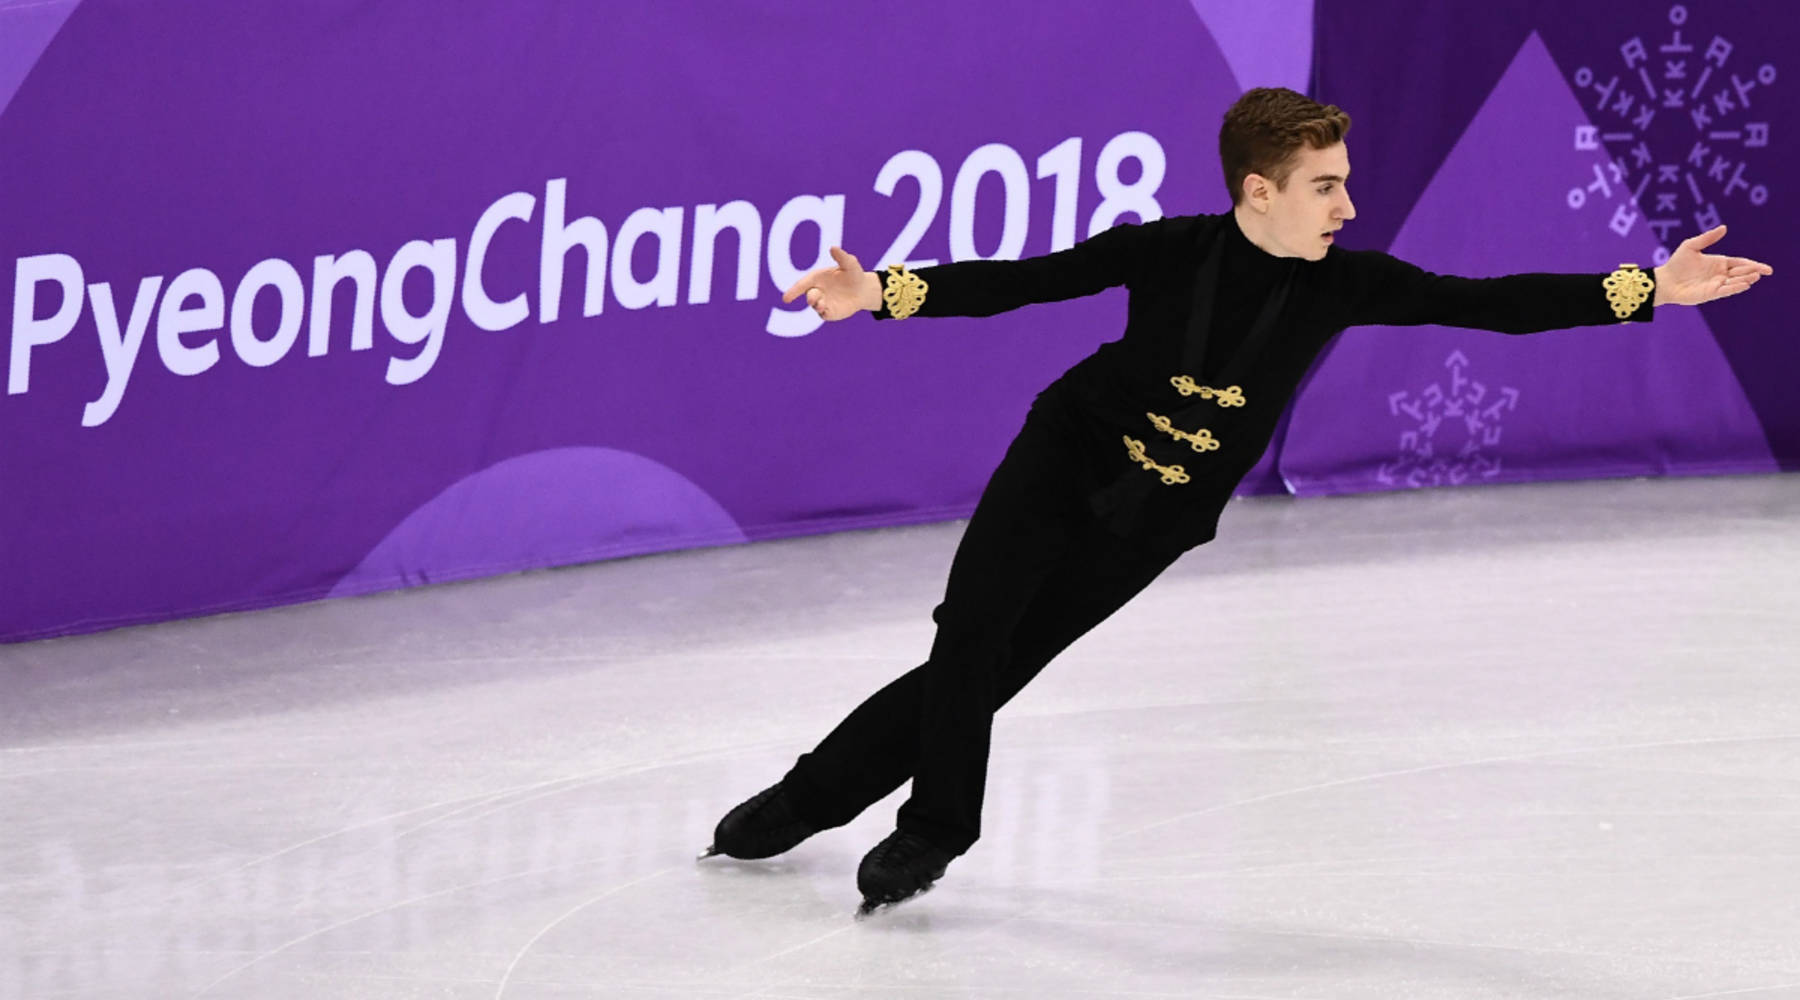 The Beatles and Beyoncé are now part of Olympic figure skating, but who pays for it?